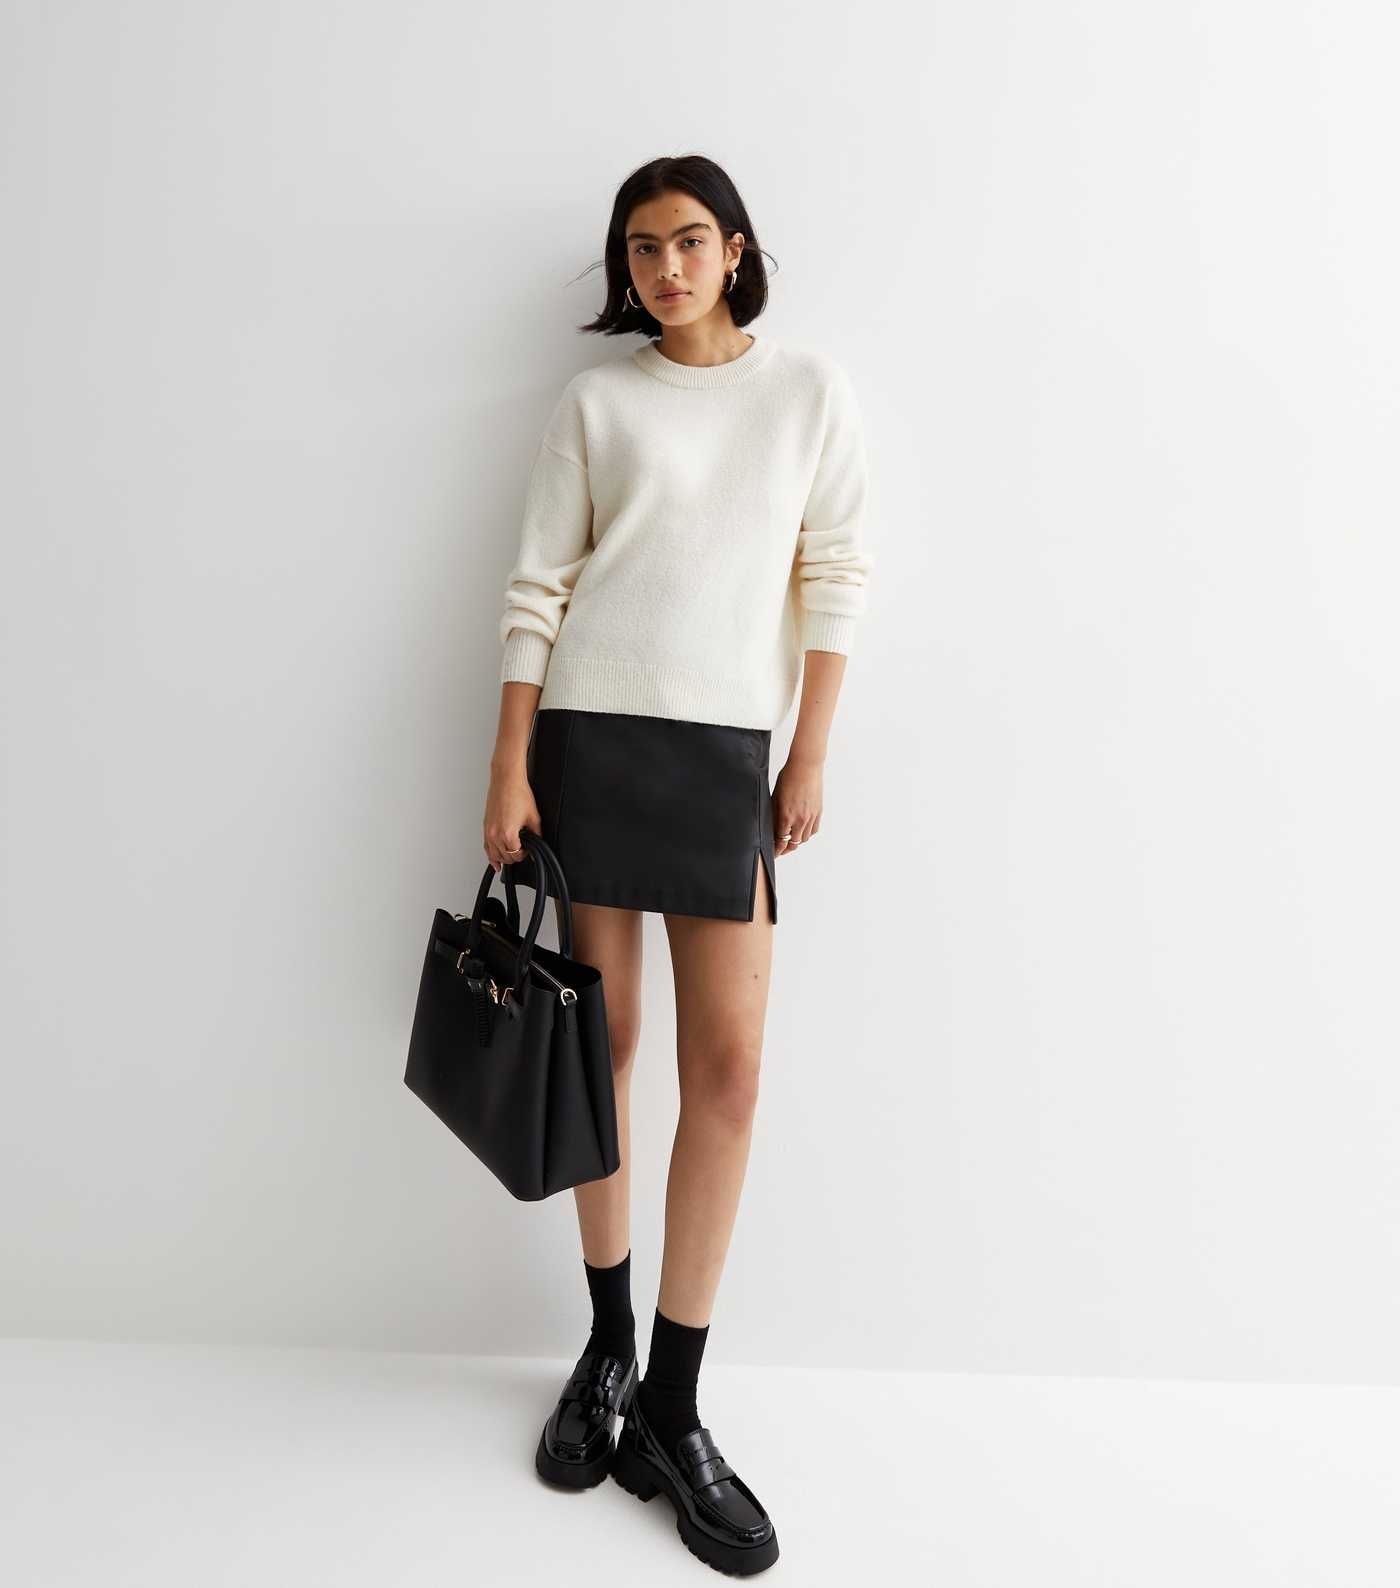 Off White Knit Crew Neck Jumper
						
						Add to Saved Items
						Remove from Saved Items | New Look (UK)